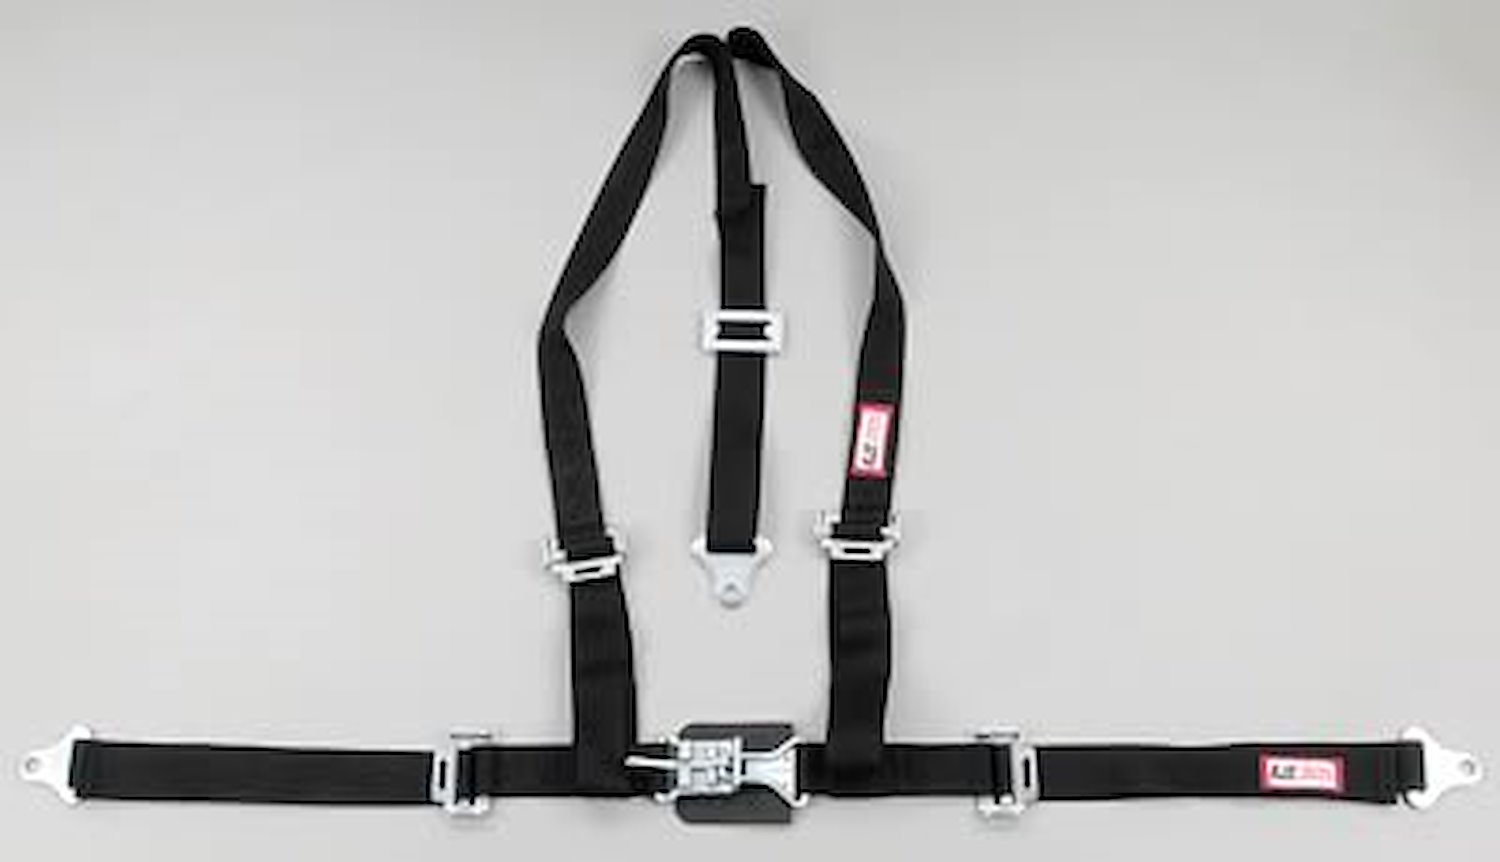 NON-SFI L&L HARNESS 2 PULL DOWN Lap Belt SEWN IN 2 S.H. V ROLL BAR Mount ALL SNAP ENDS BLACK